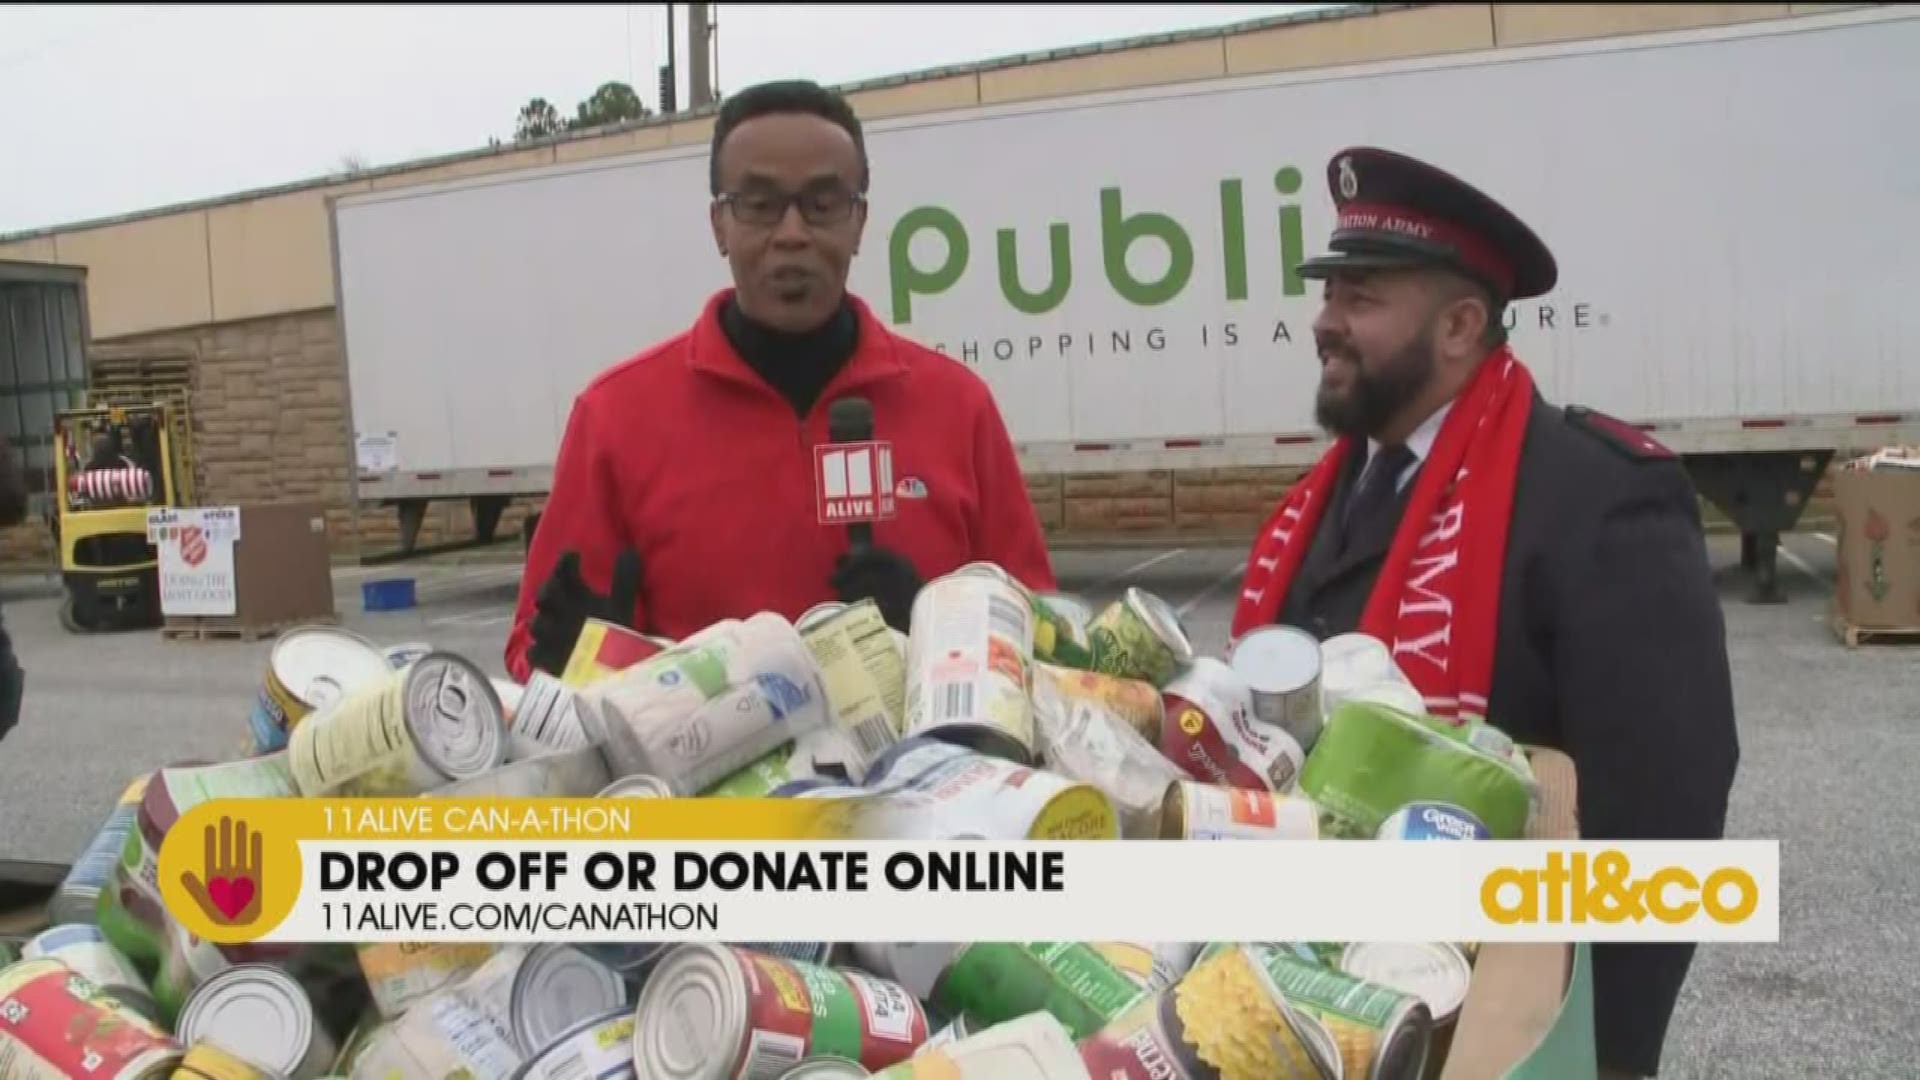 Thank you for joining us at the 37th Annual 11Alive Can-A-Thon and donating canned goods to Salvation Army Metro Atlanta.